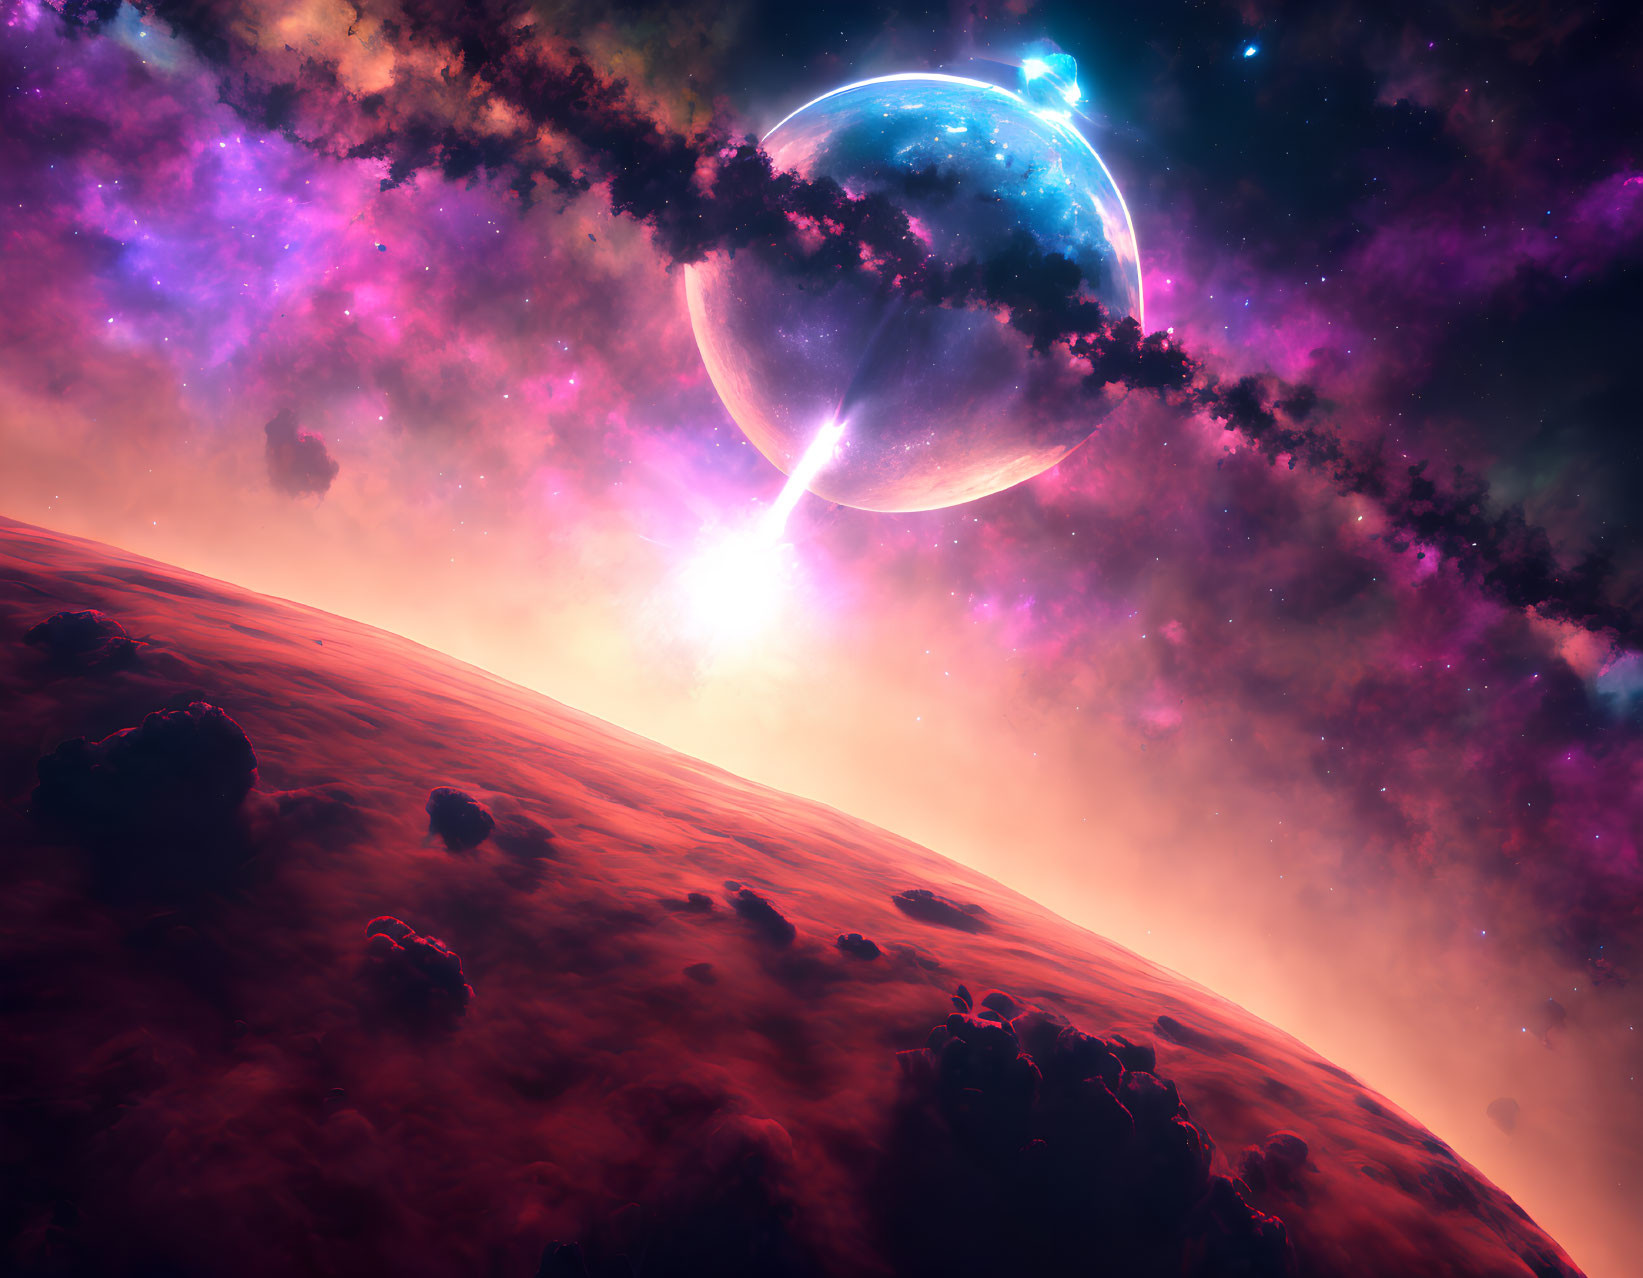 Colorful space scene with red planet, asteroids, and luminous nebula.